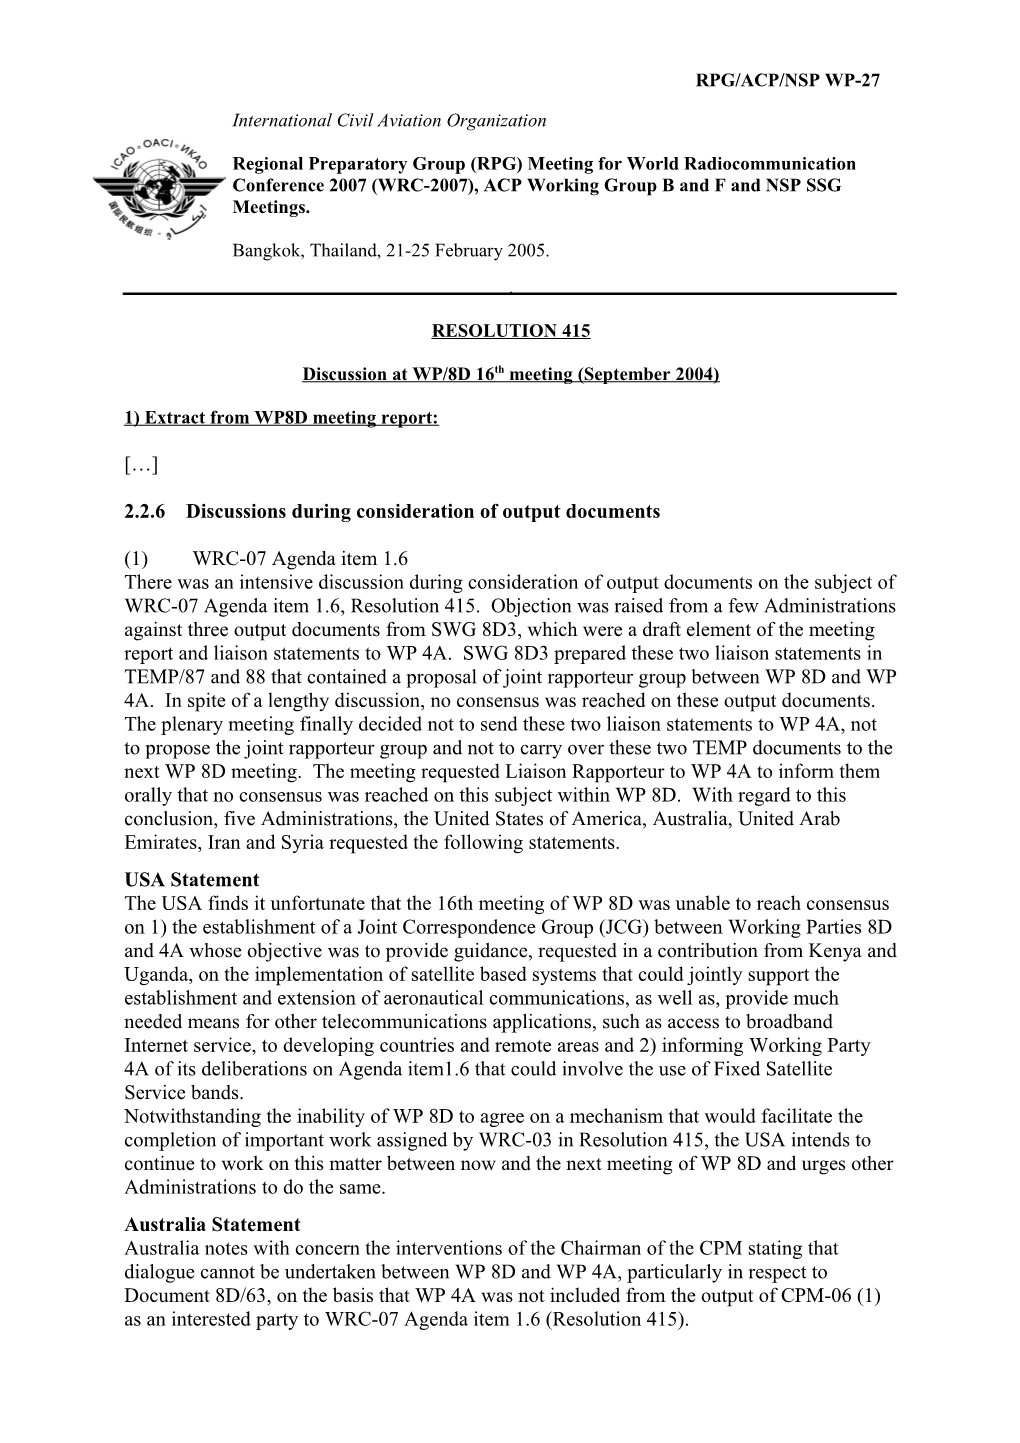 ITU Resolution 415 - Discussion at WP/8D 16Th Meeting (September 2004) - Extract from WP8D